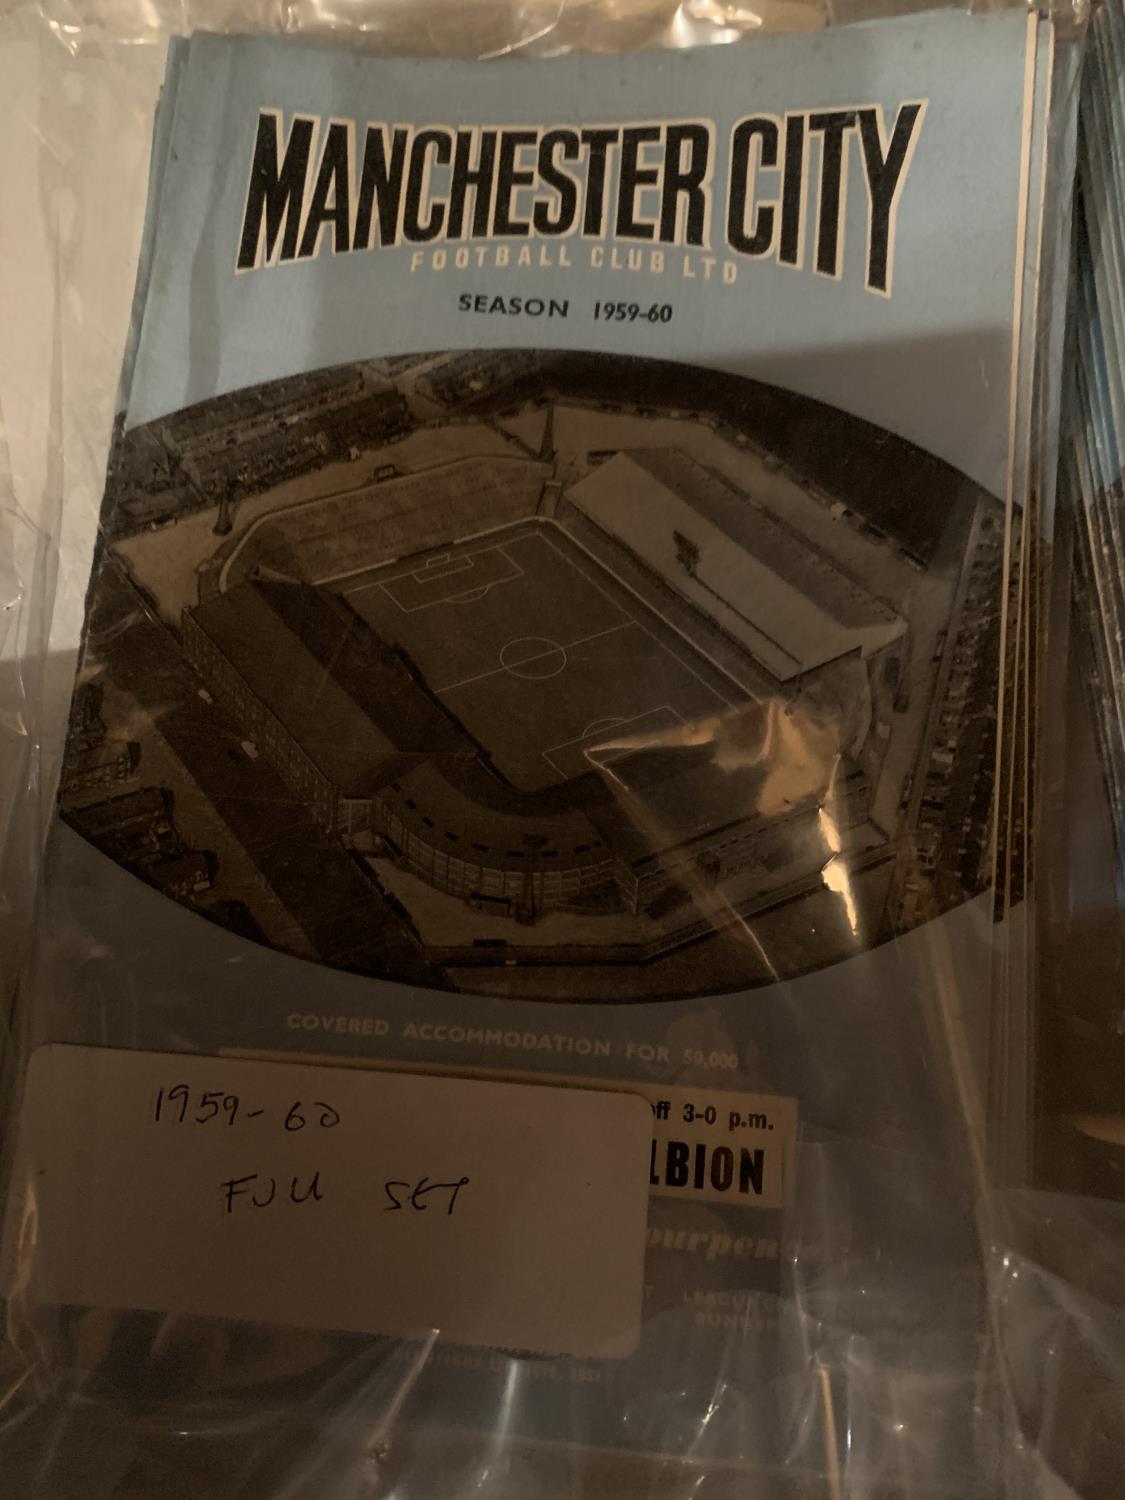 A LARGE COLLECTION OF VINTAGE MANCHESTER CITY PROGRAMMES SOME FULL SETS - Image 2 of 7